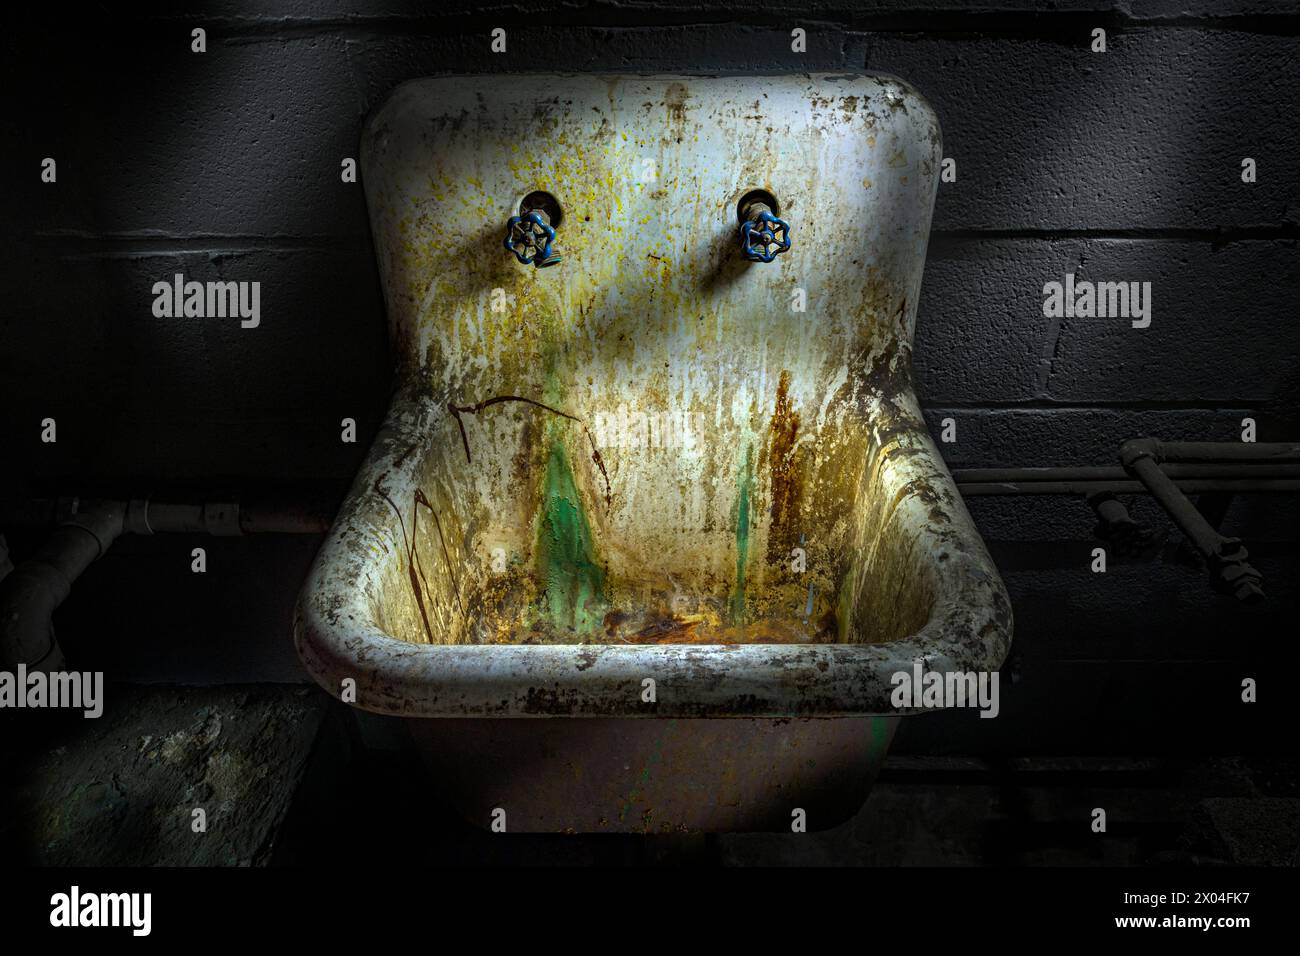 Dirty filthy stained sink Stock Photo